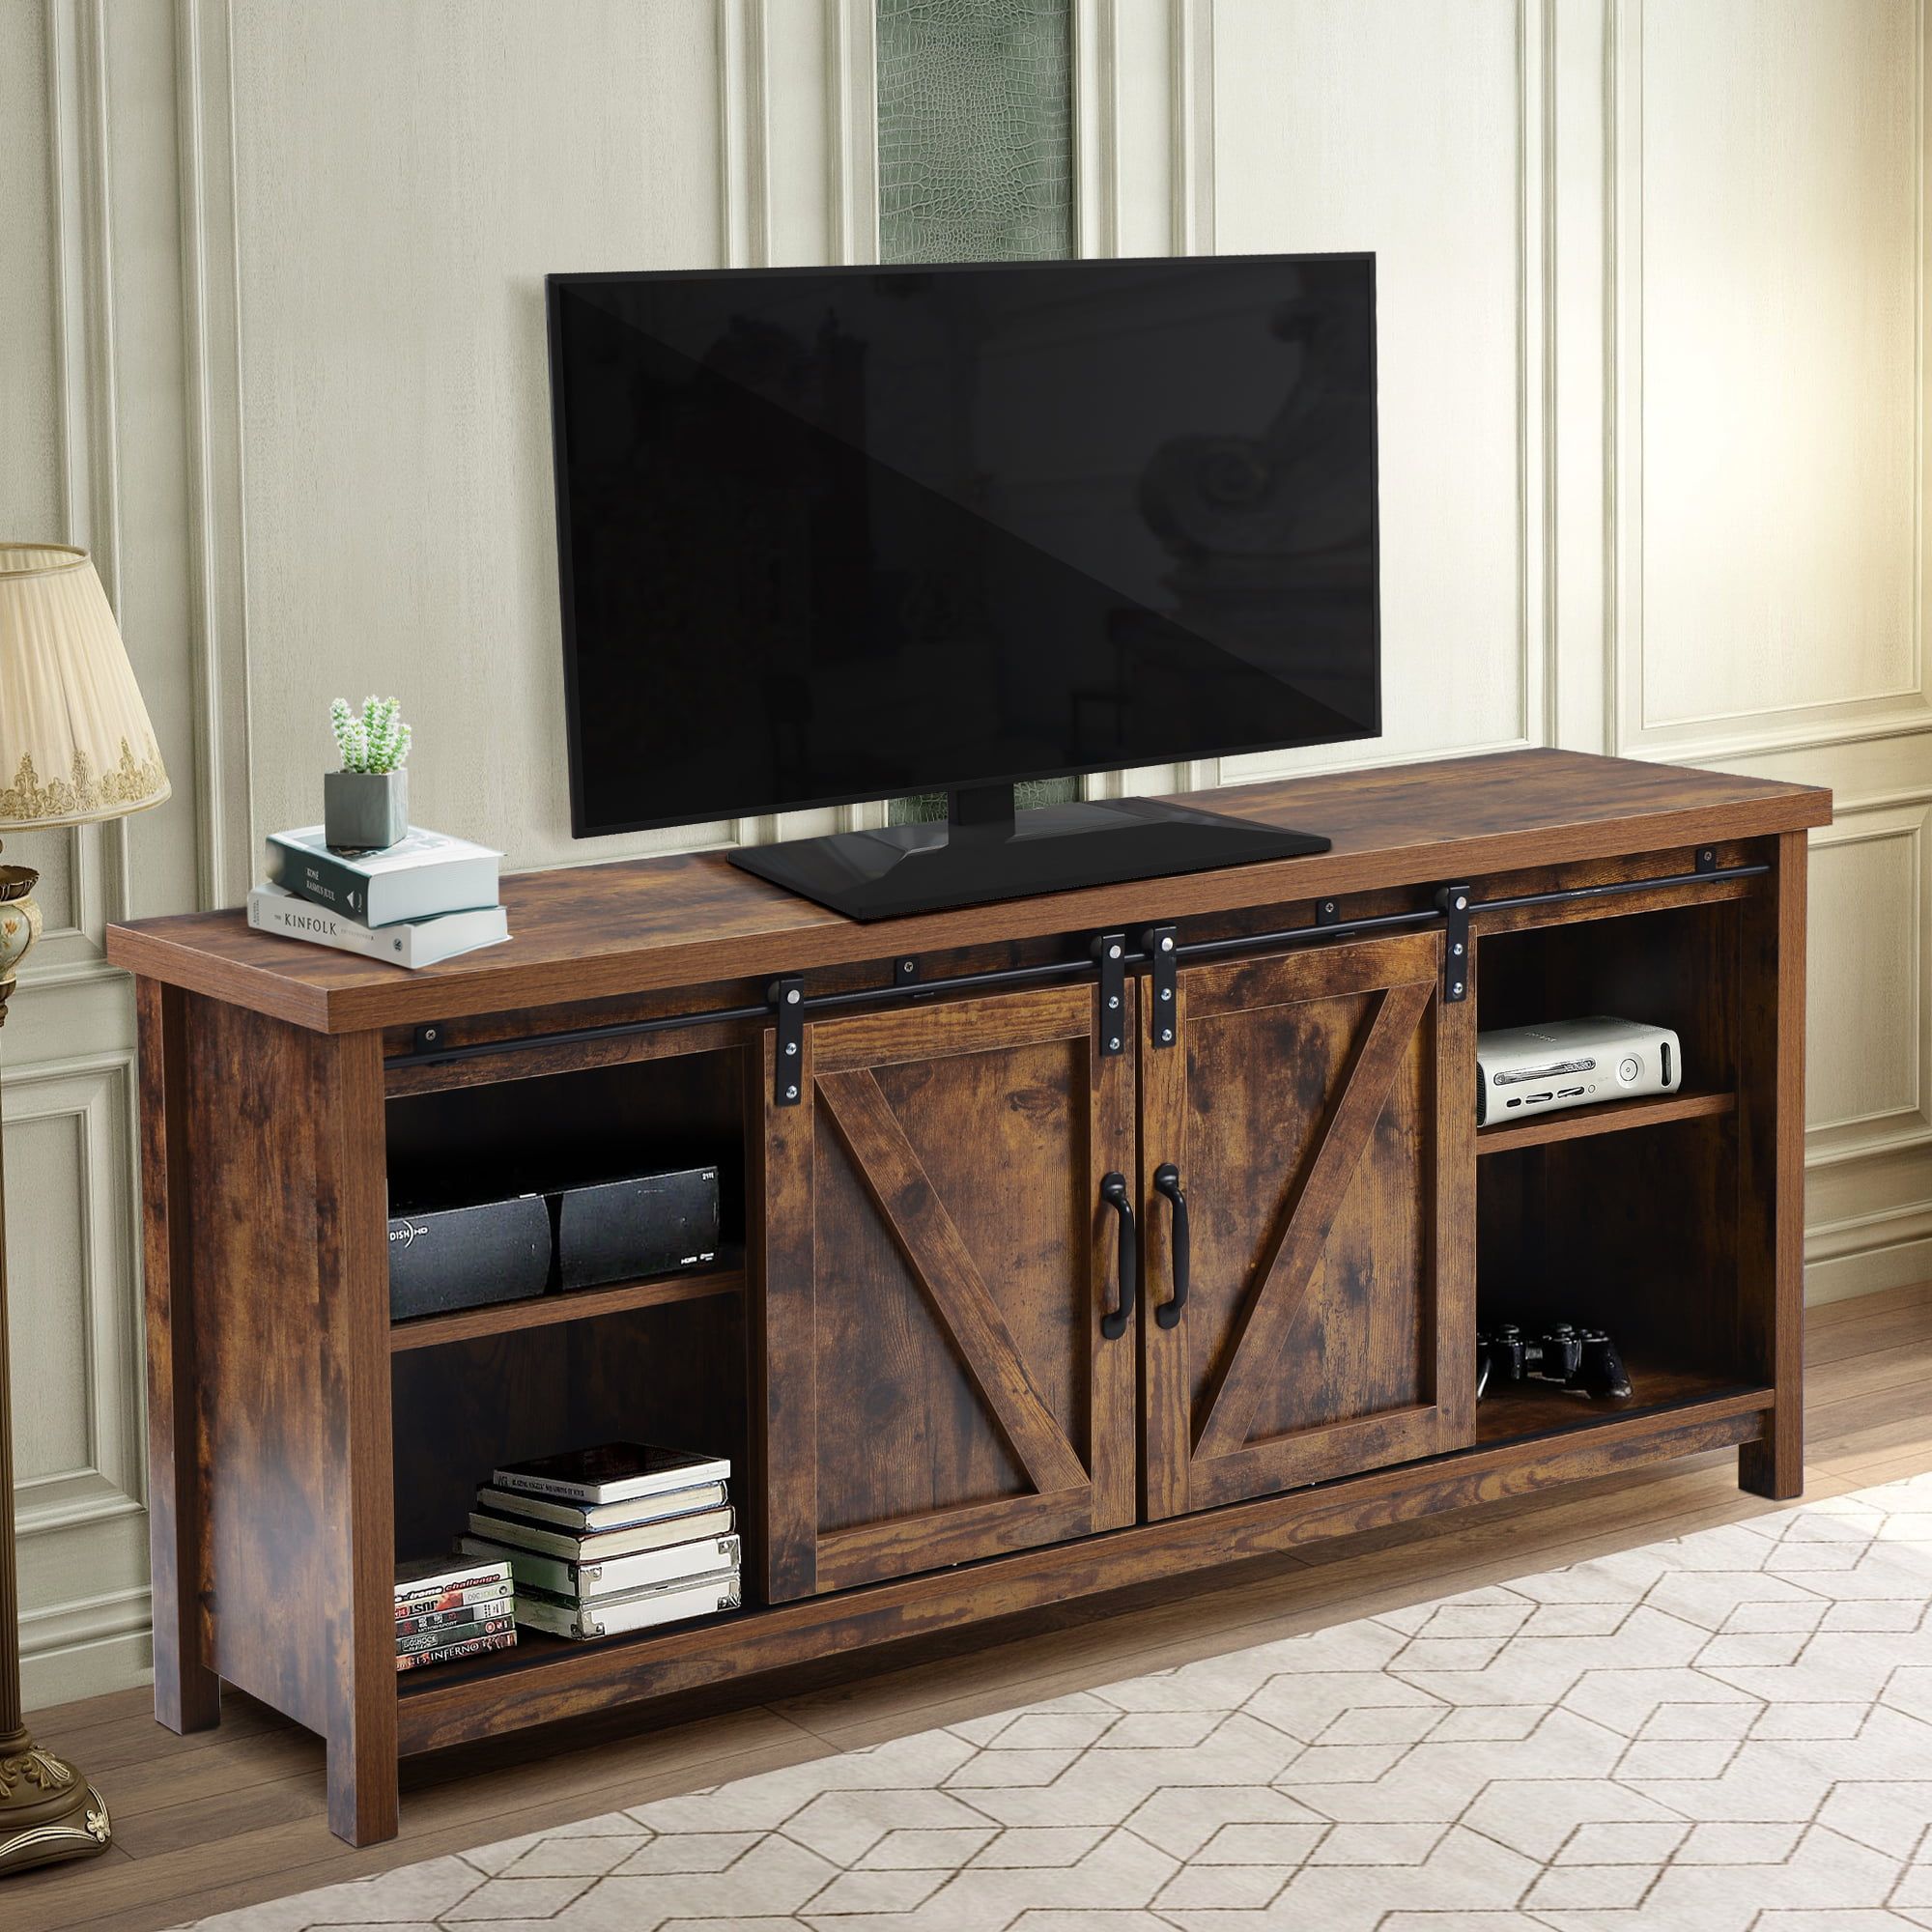 Buy Farmhouse 52'' Tv Stands With Adjustable Leg, Segmart Traditional Inside Farmhouse Stands For Tvs (Gallery 12 of 20)